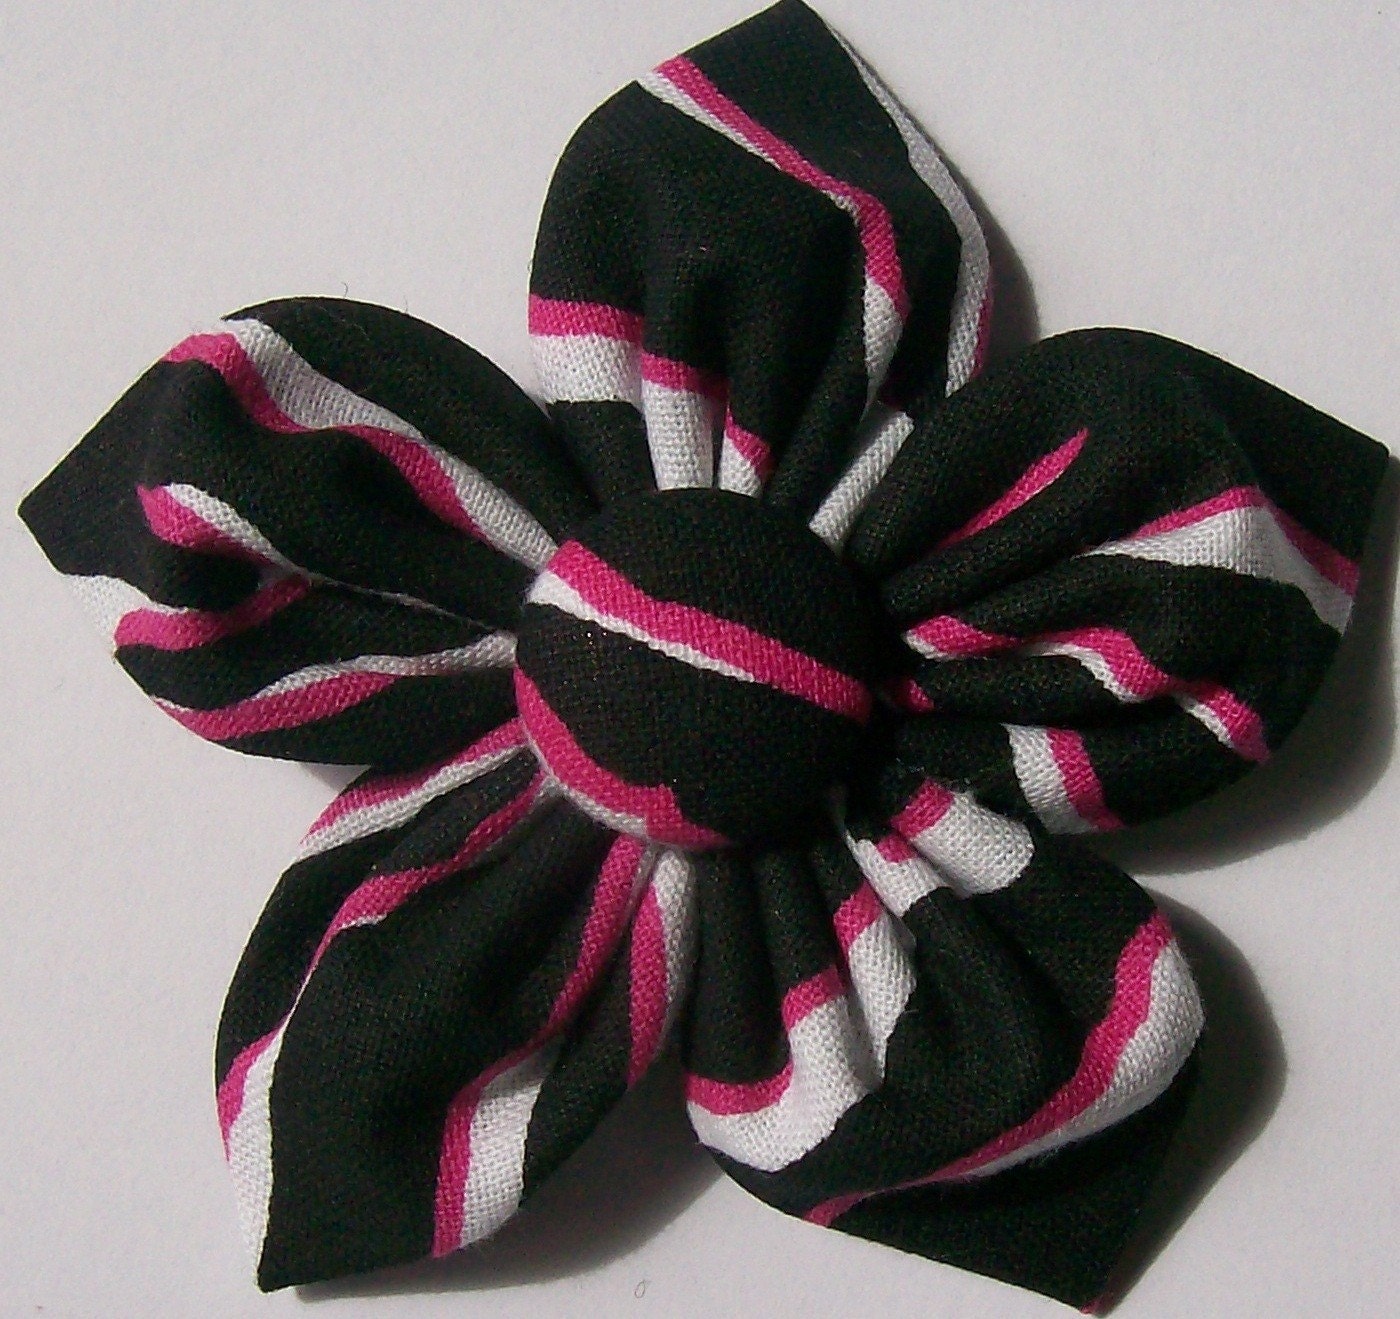 Zebra Print Fabric Flower Bow Black, Shocking Pink and White for Adult, Teen, Children, Baby. From 4SistersCreations